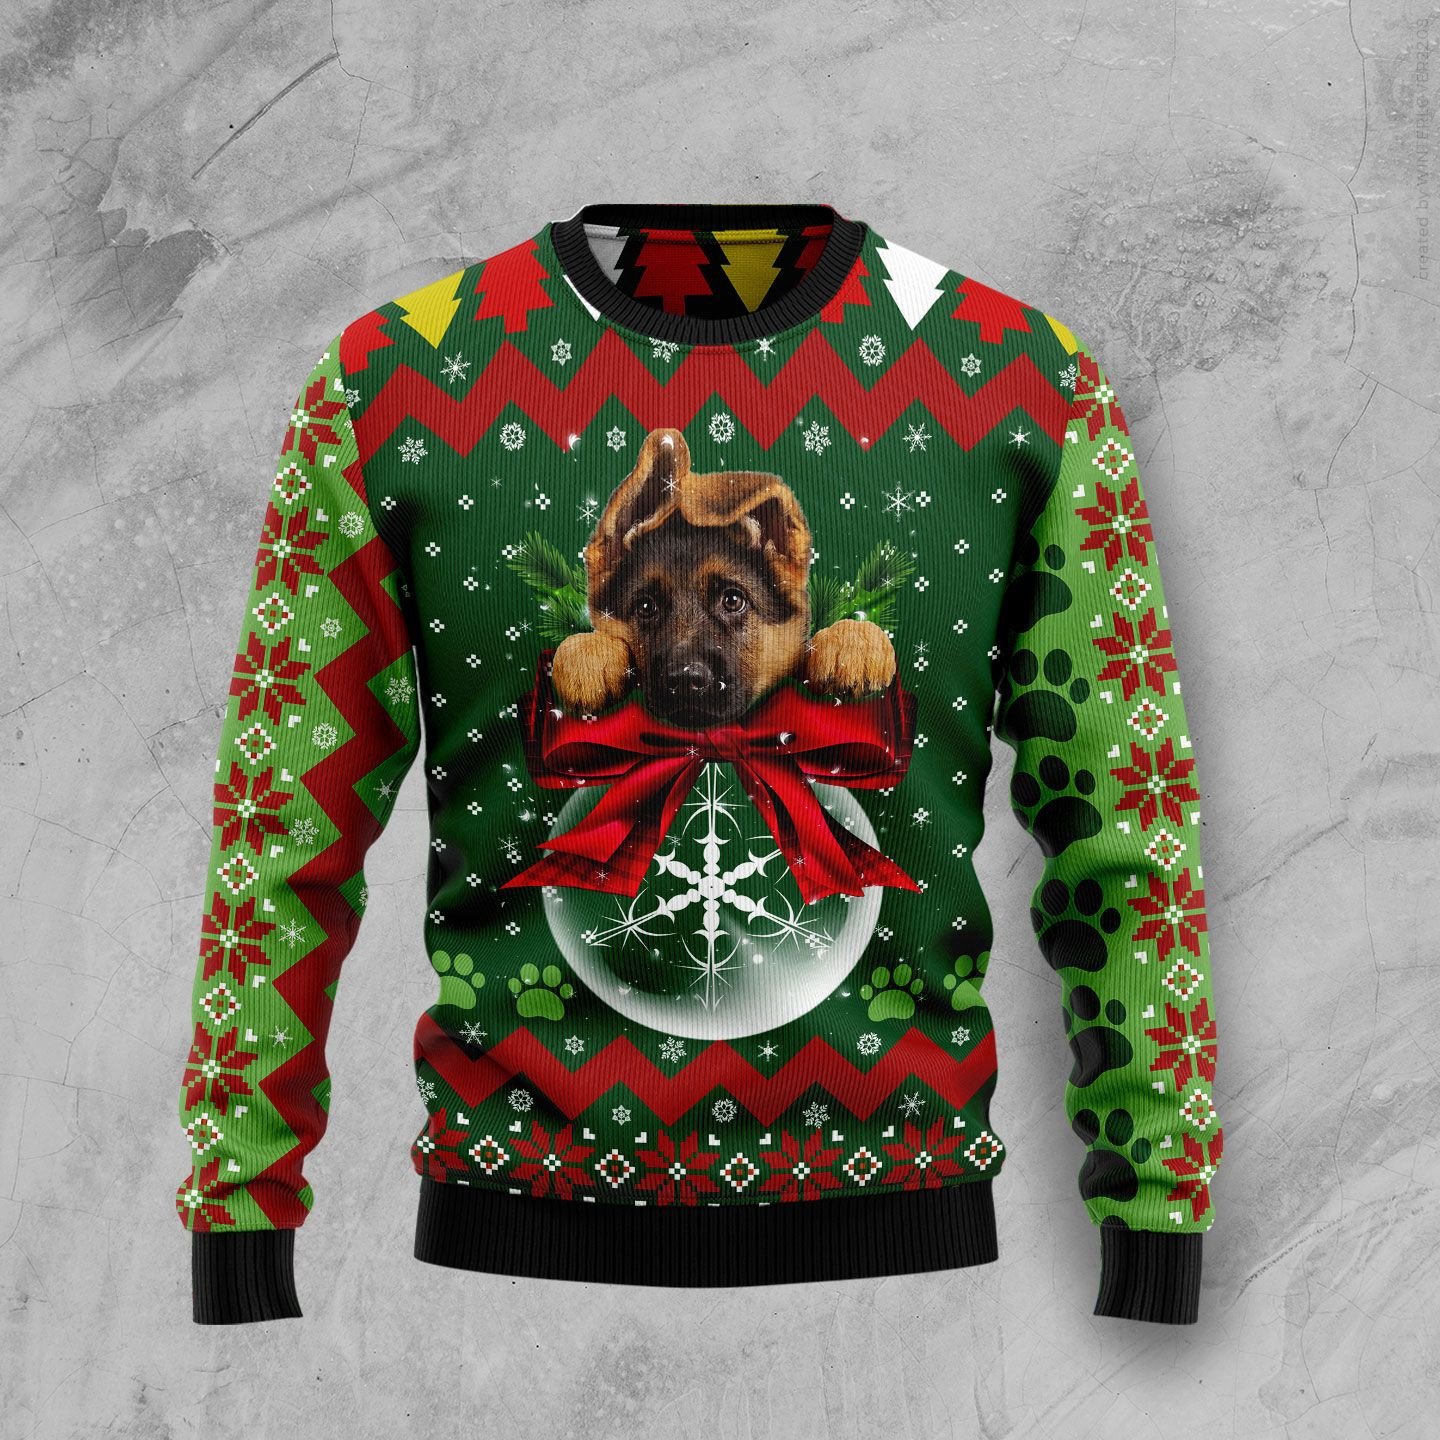 German Shepherd Ornament Ugly Christmas Sweater Ugly Sweater For Men Women, Holiday Sweater